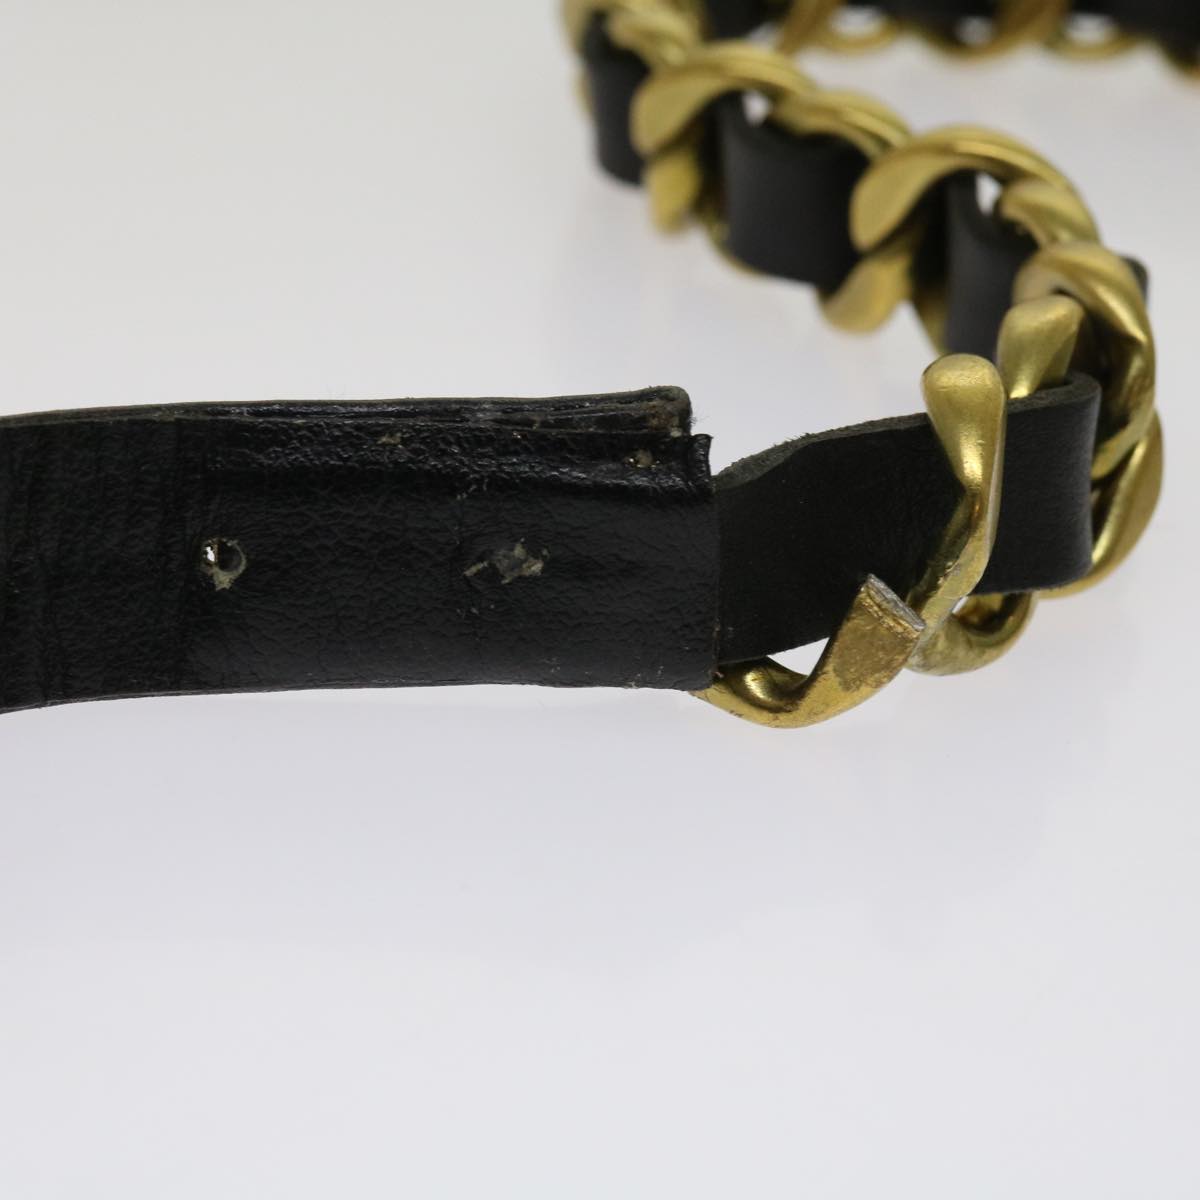 CHANEL Belt Leather 25.6""-27.6"" Gold Tone Black CC Auth bs11333